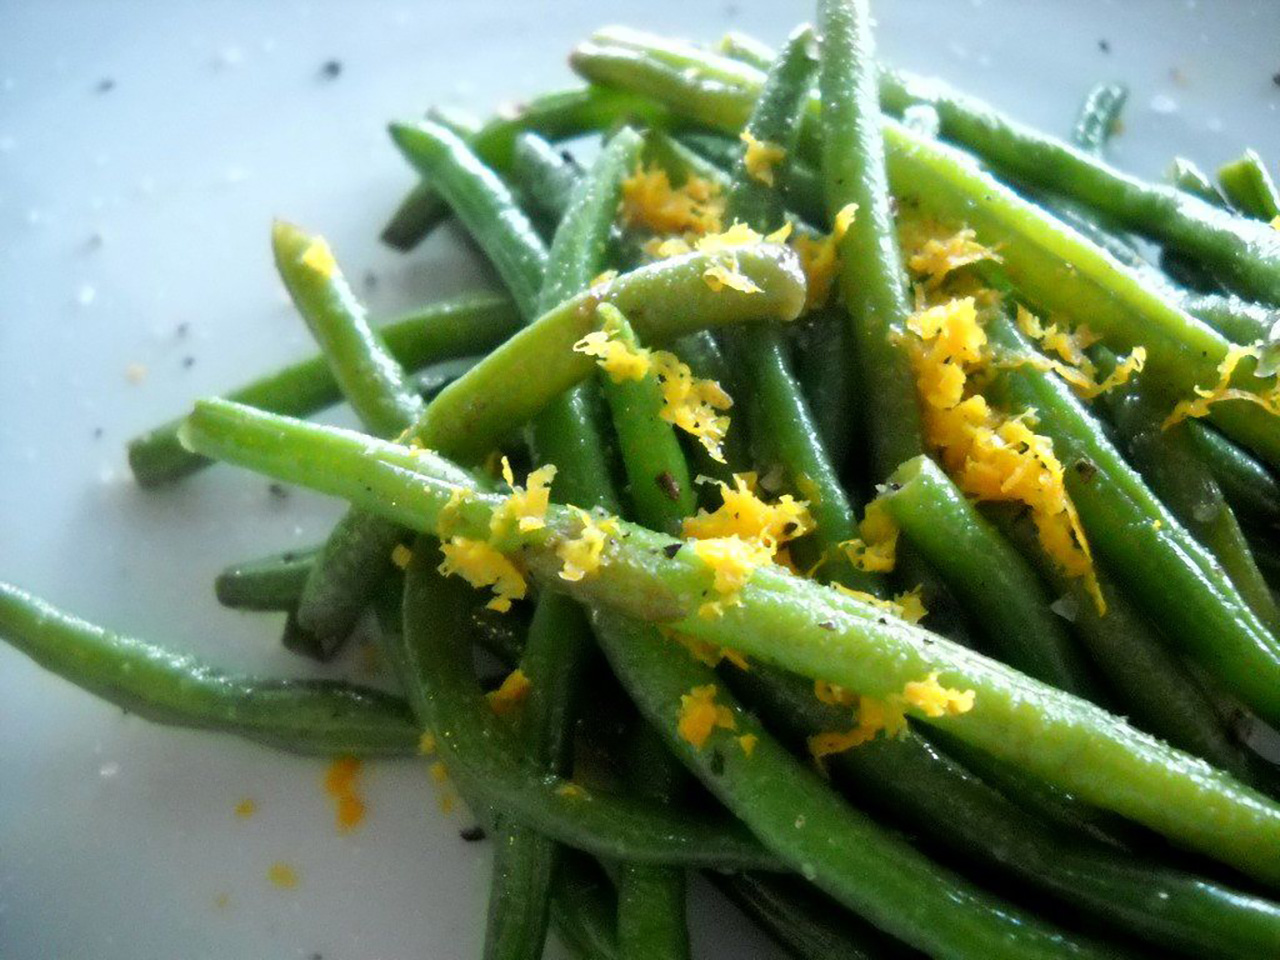 Green Beans With Orange Olive Oil